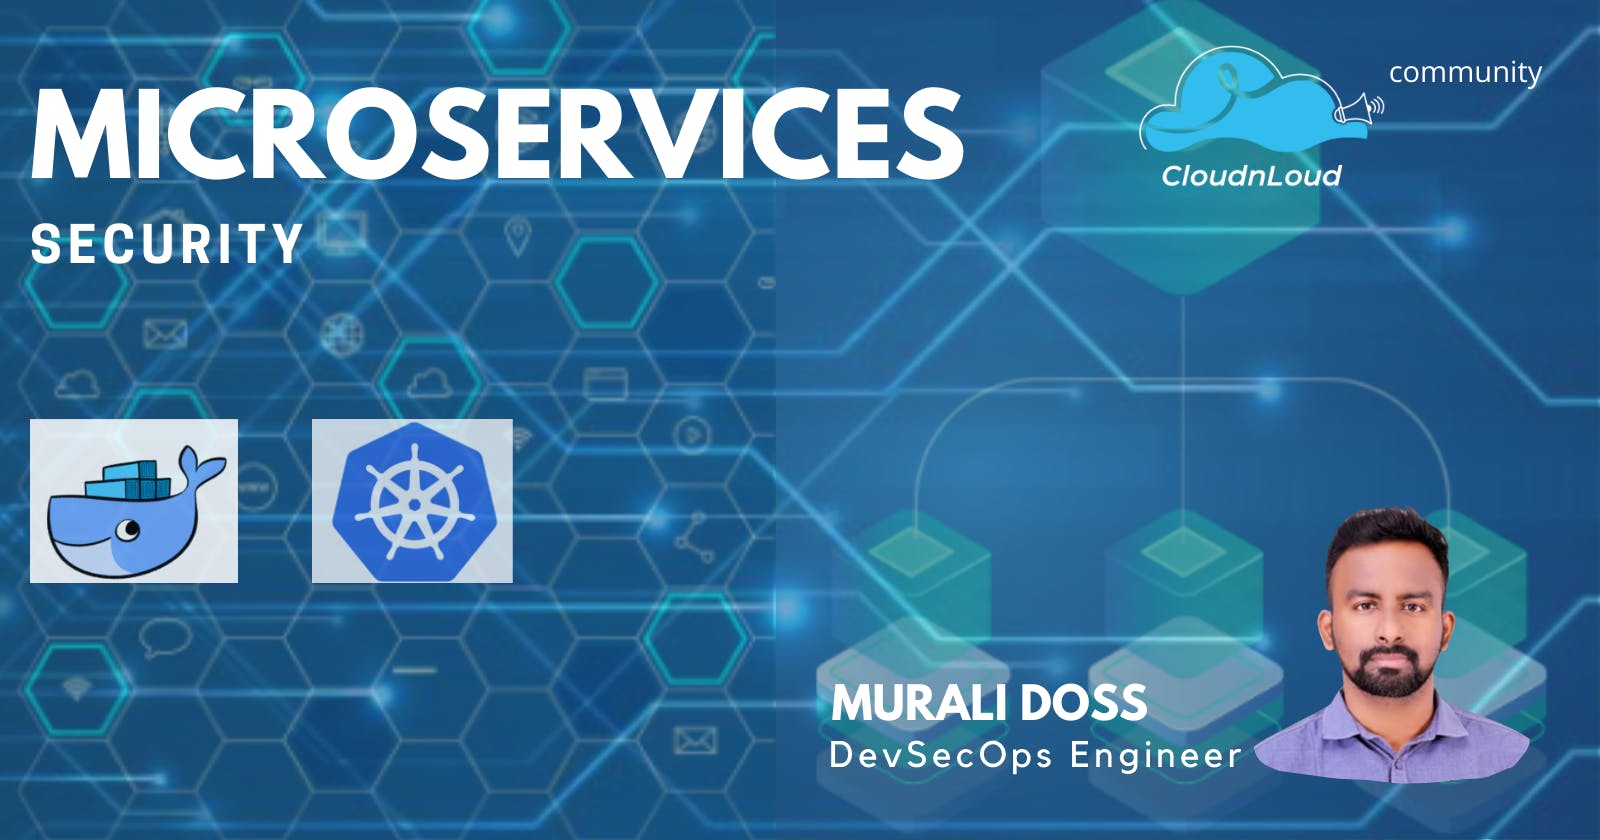 Overview of Microservices Security